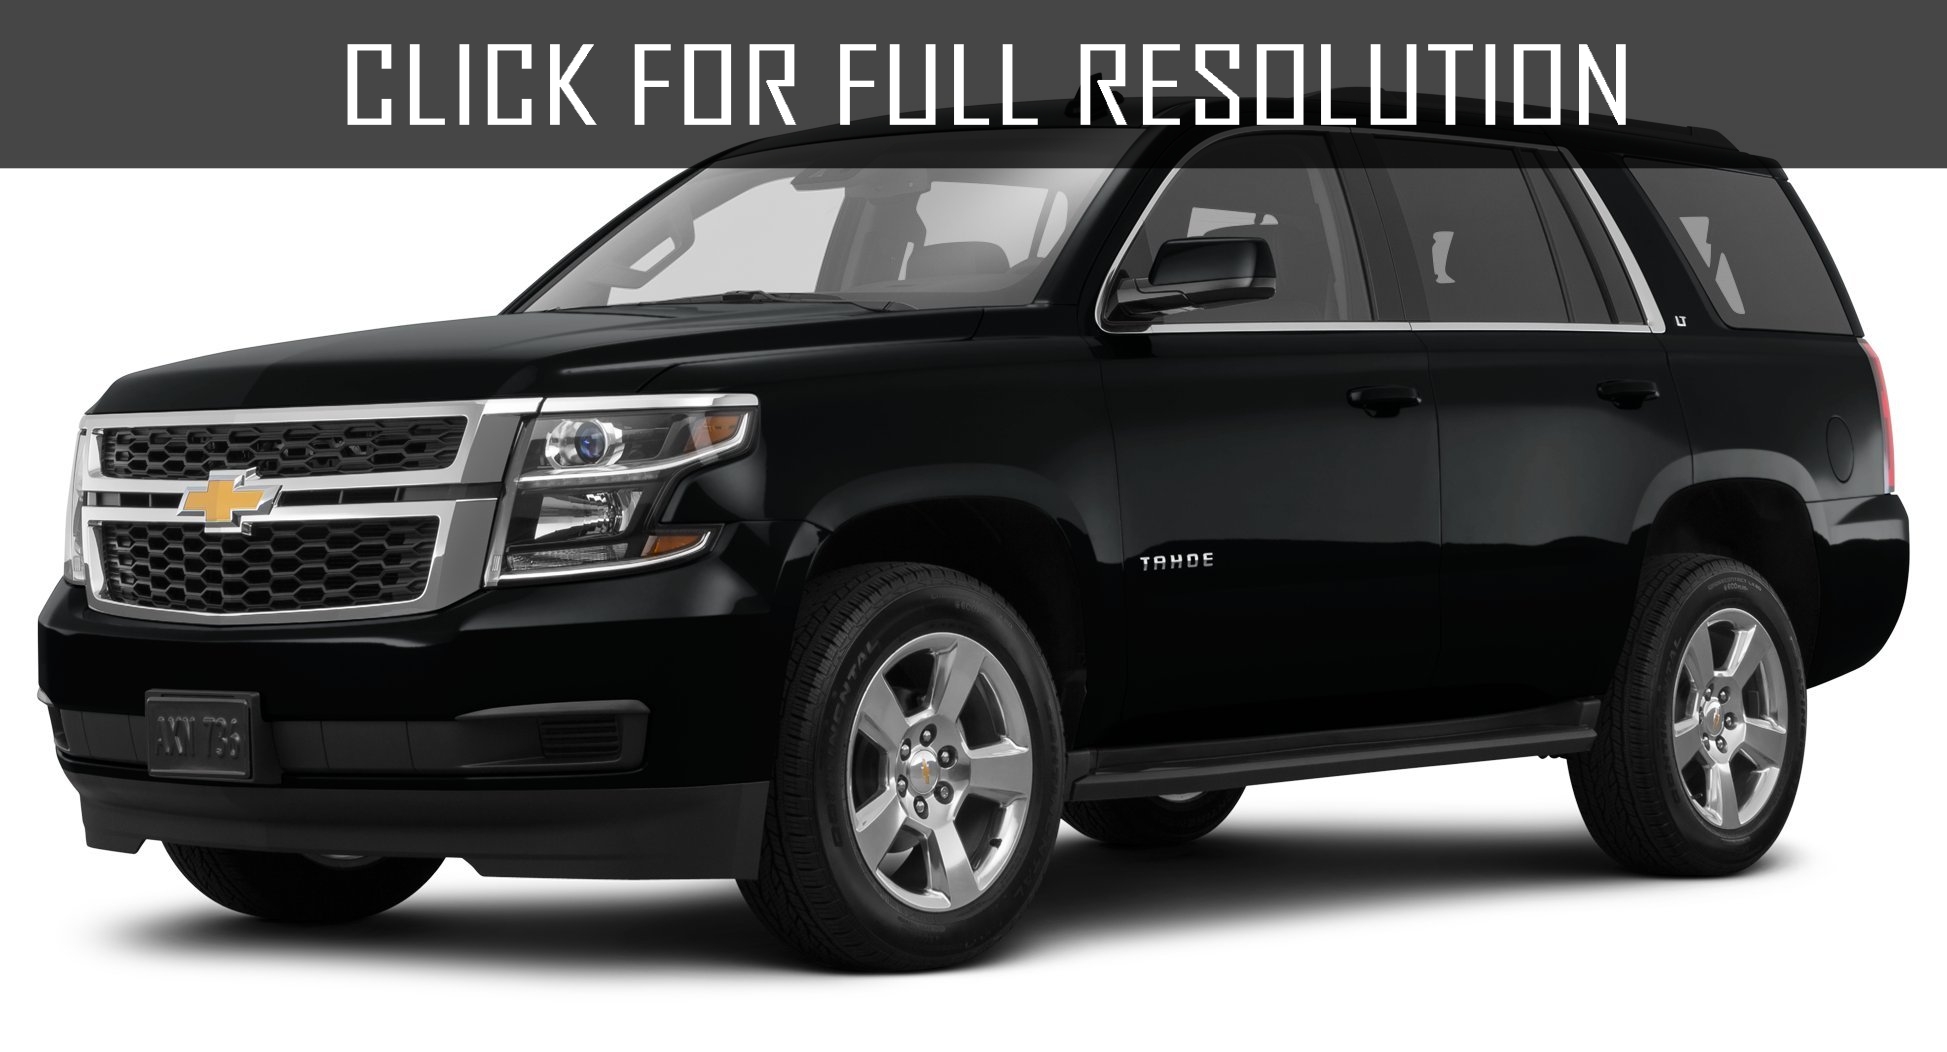 Chevrolet Tahoe Black Edition amazing photo gallery, some information and specifications, as